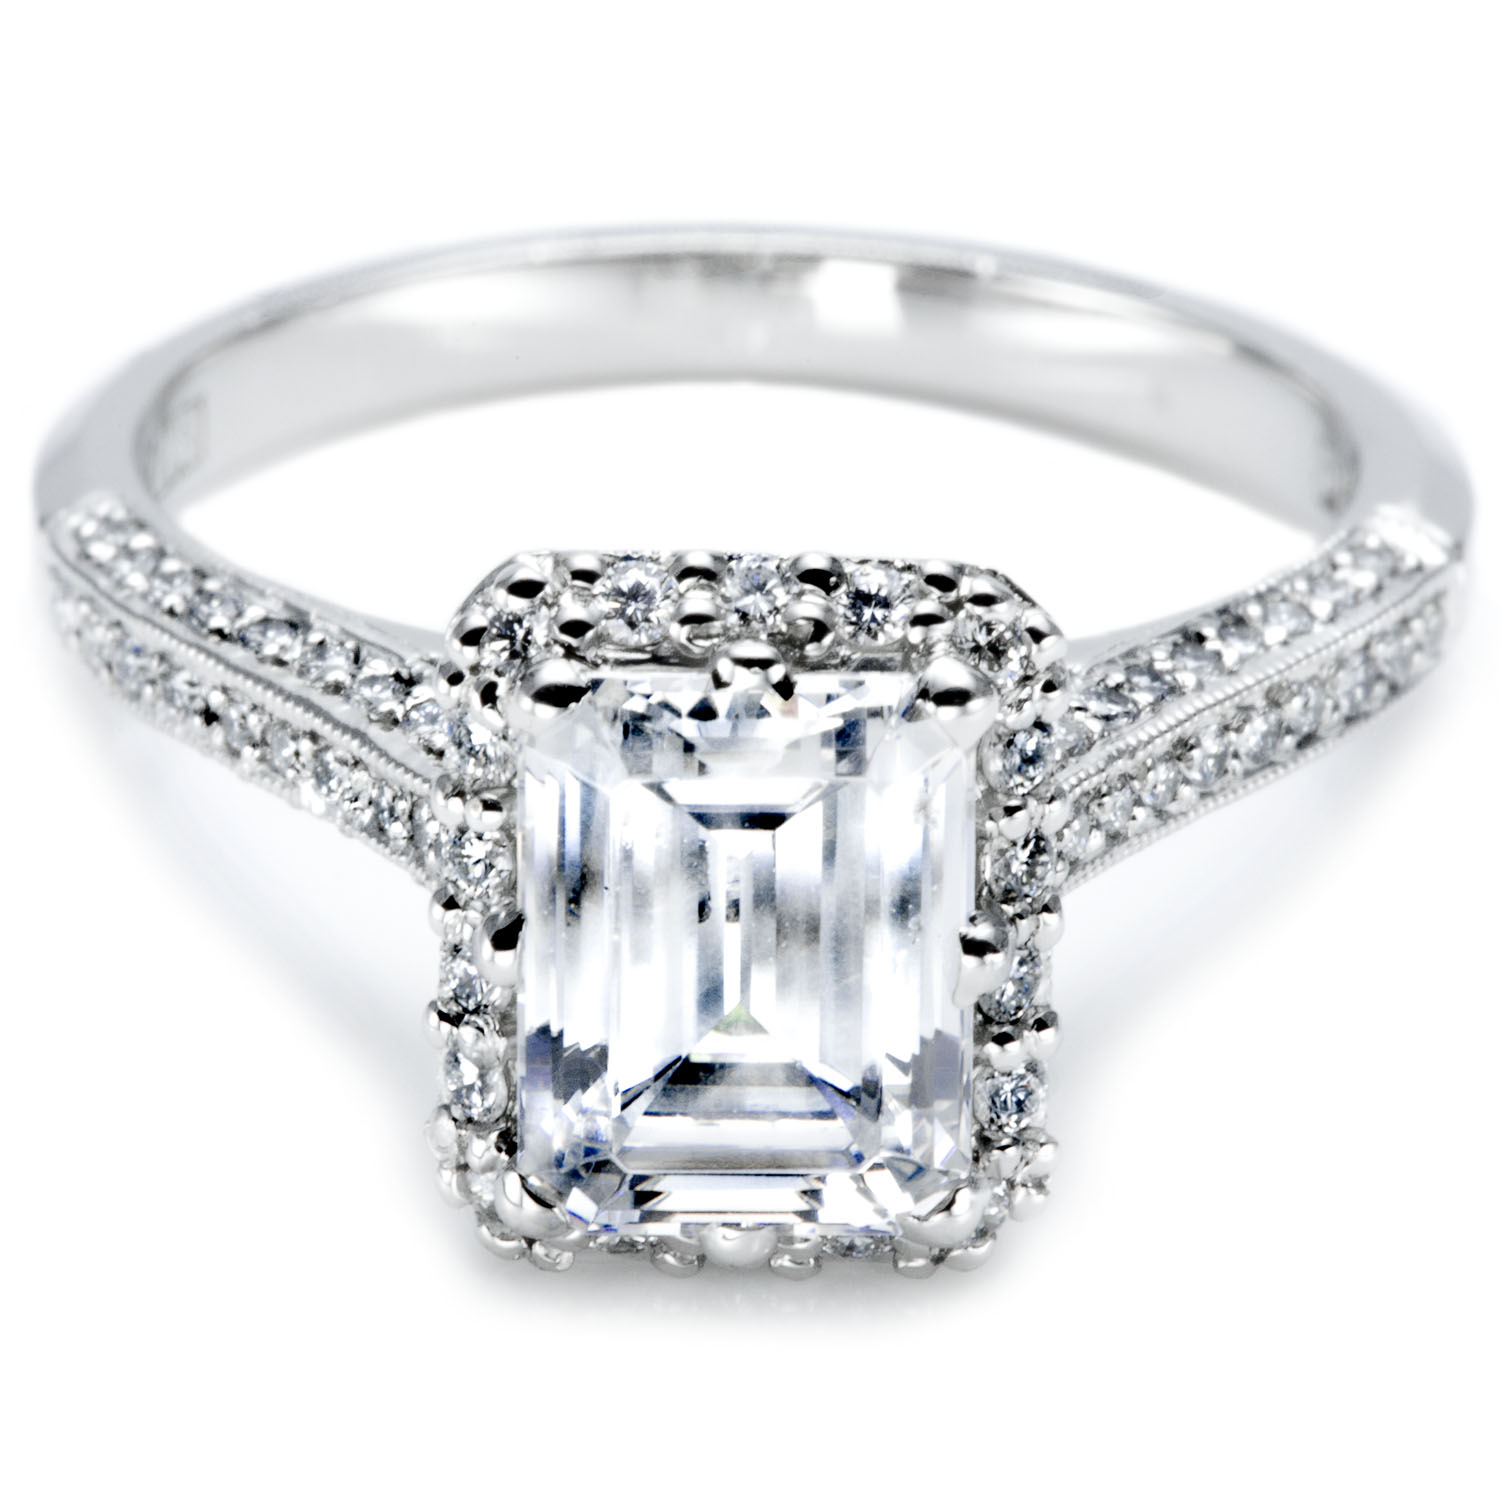 Looking for biggest diamond engagement ring online